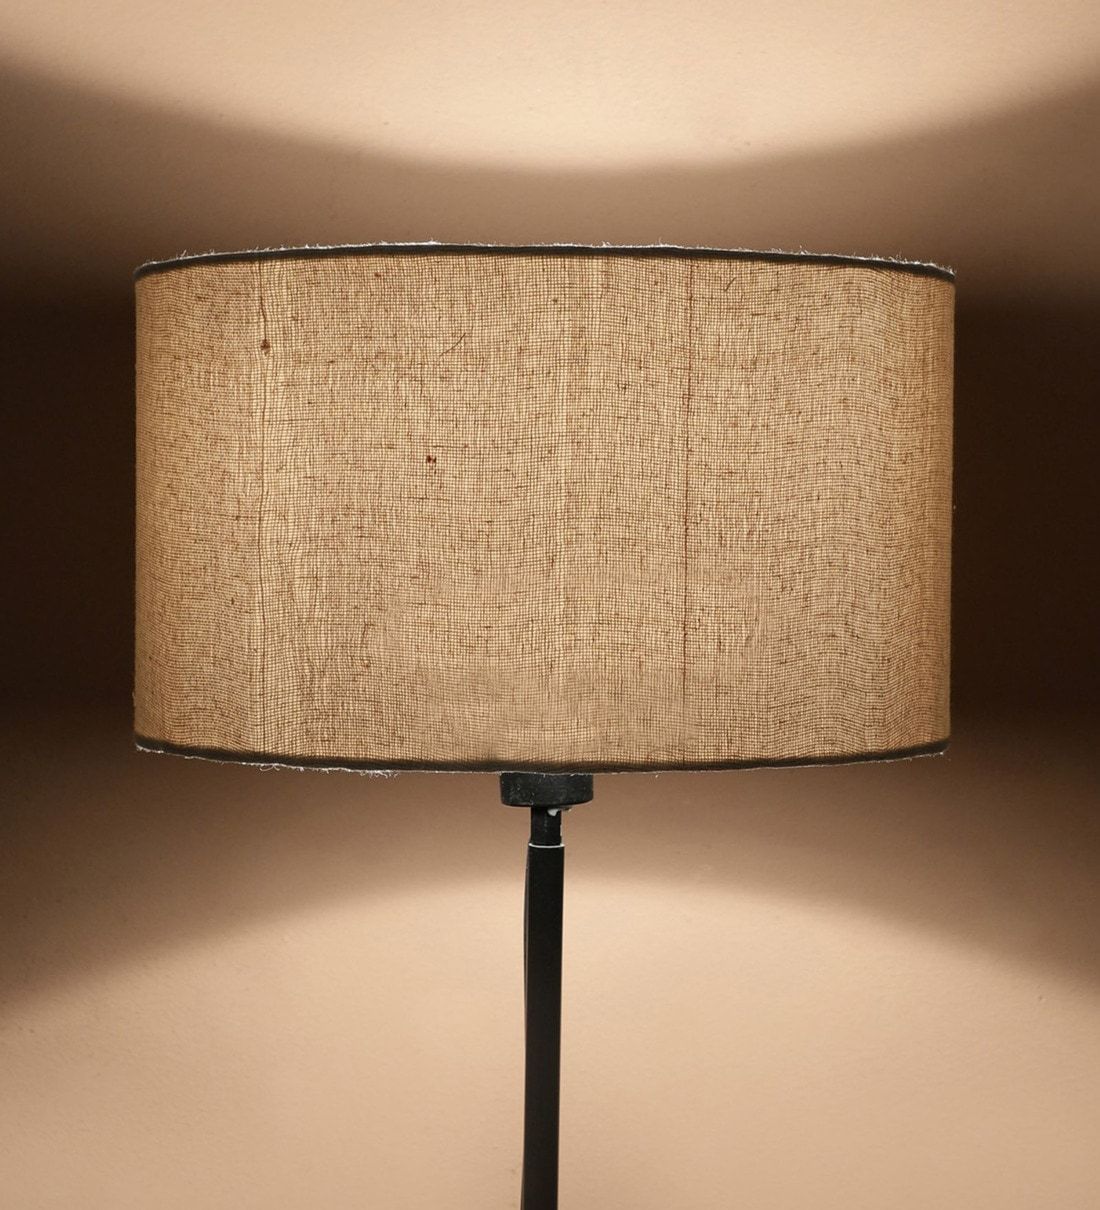 Buy Cream Texture Cotton Fabric Shade Lamp Shadebtr Crafts Online –  Solid – Lamp Shades – Lamps And Lighting – Pepperfry Product Regarding Textured Fabric Floor Lamps (View 8 of 15)